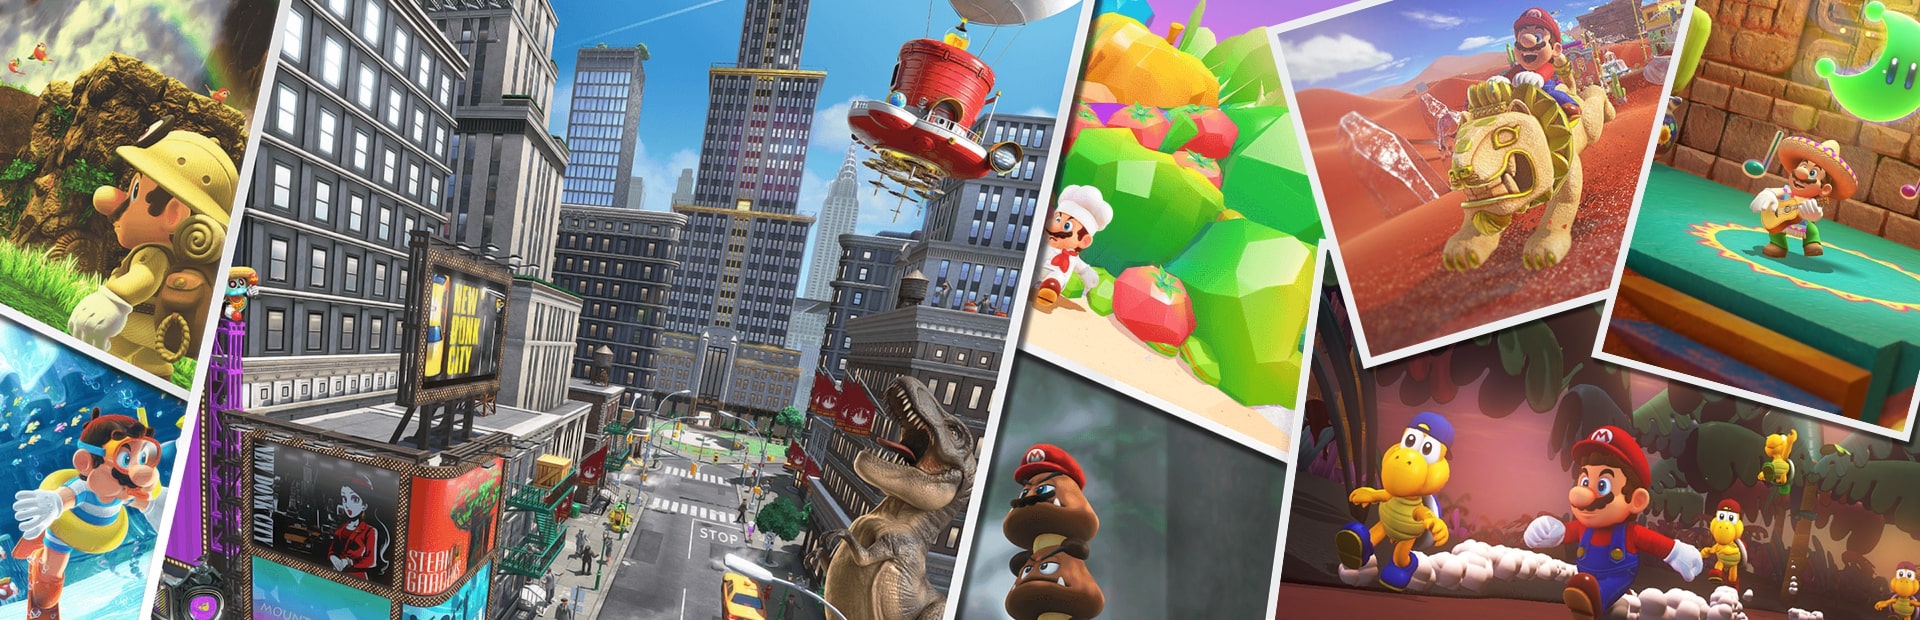 Super Mario Odyssey Review: Traditional Mario in an Incredible New Adventure